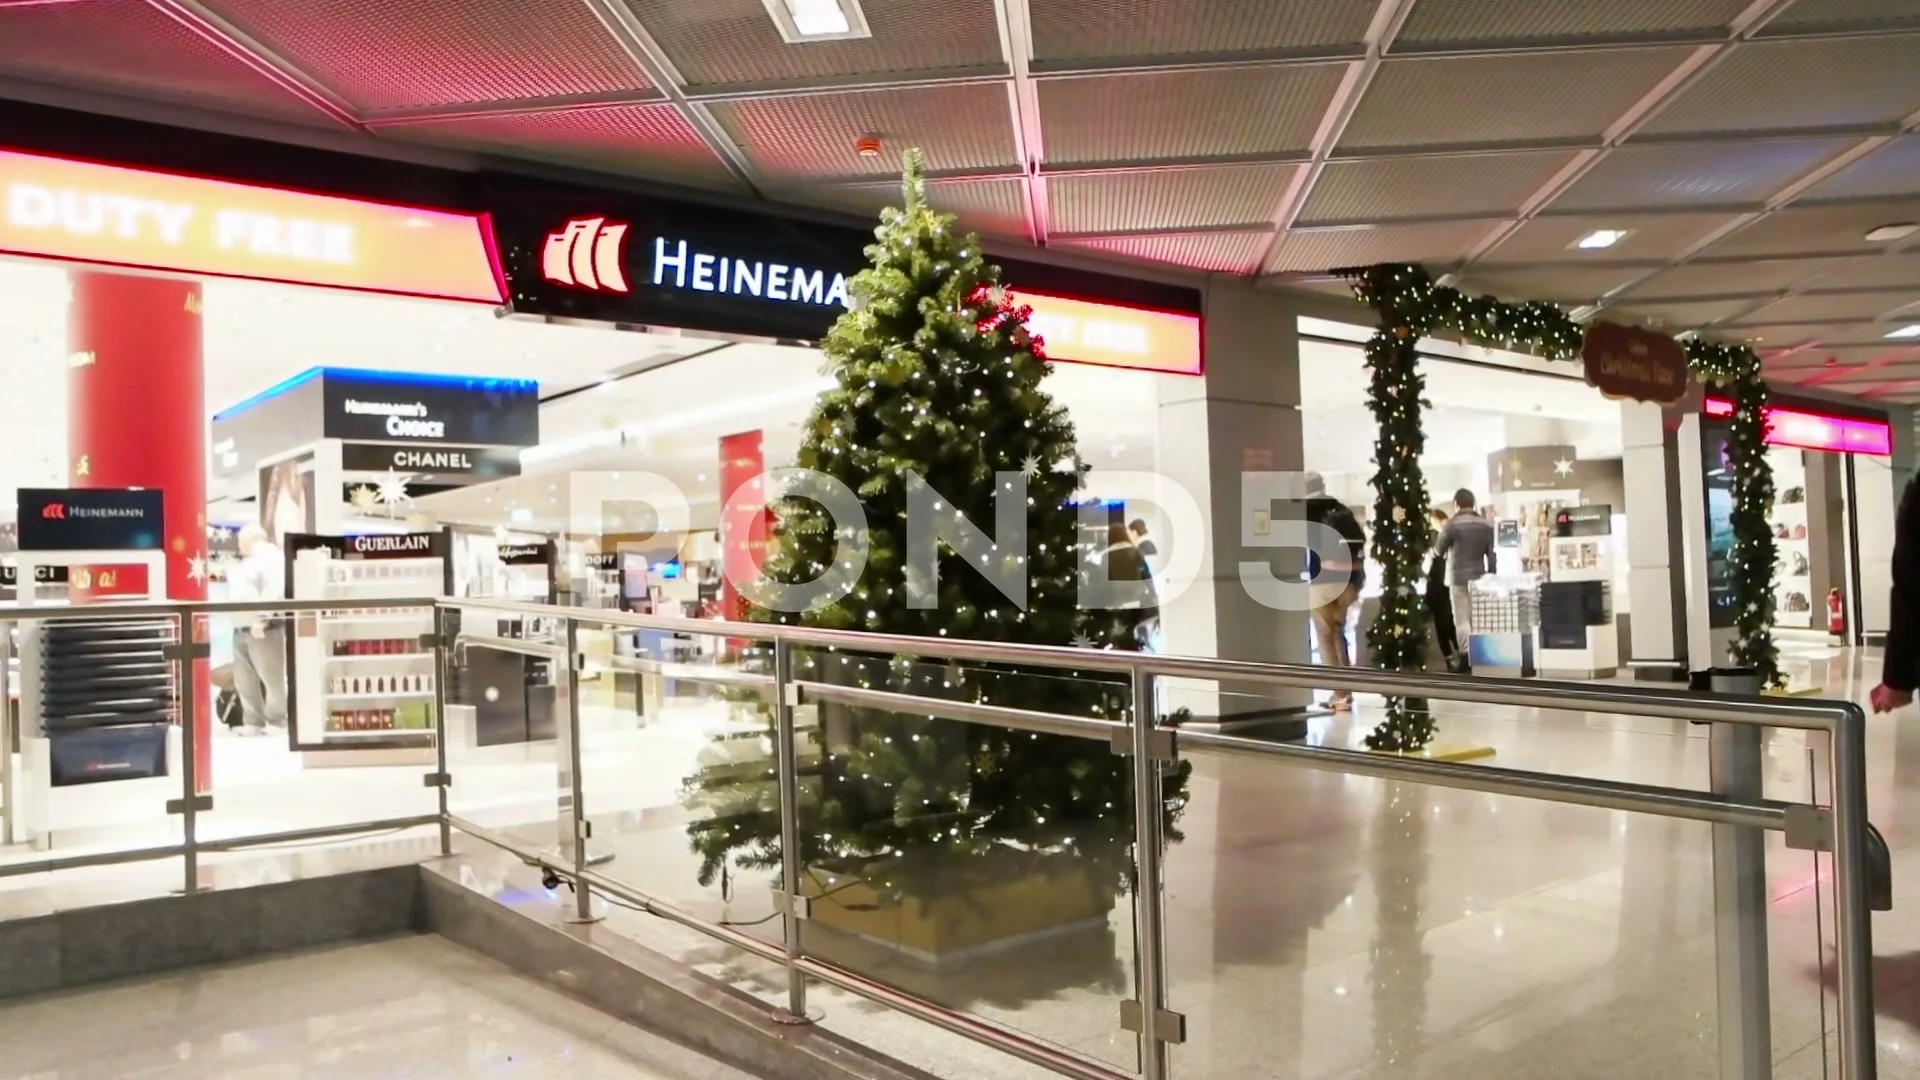 New Heinemann Duty Free Shop opens at Boryspil Airport